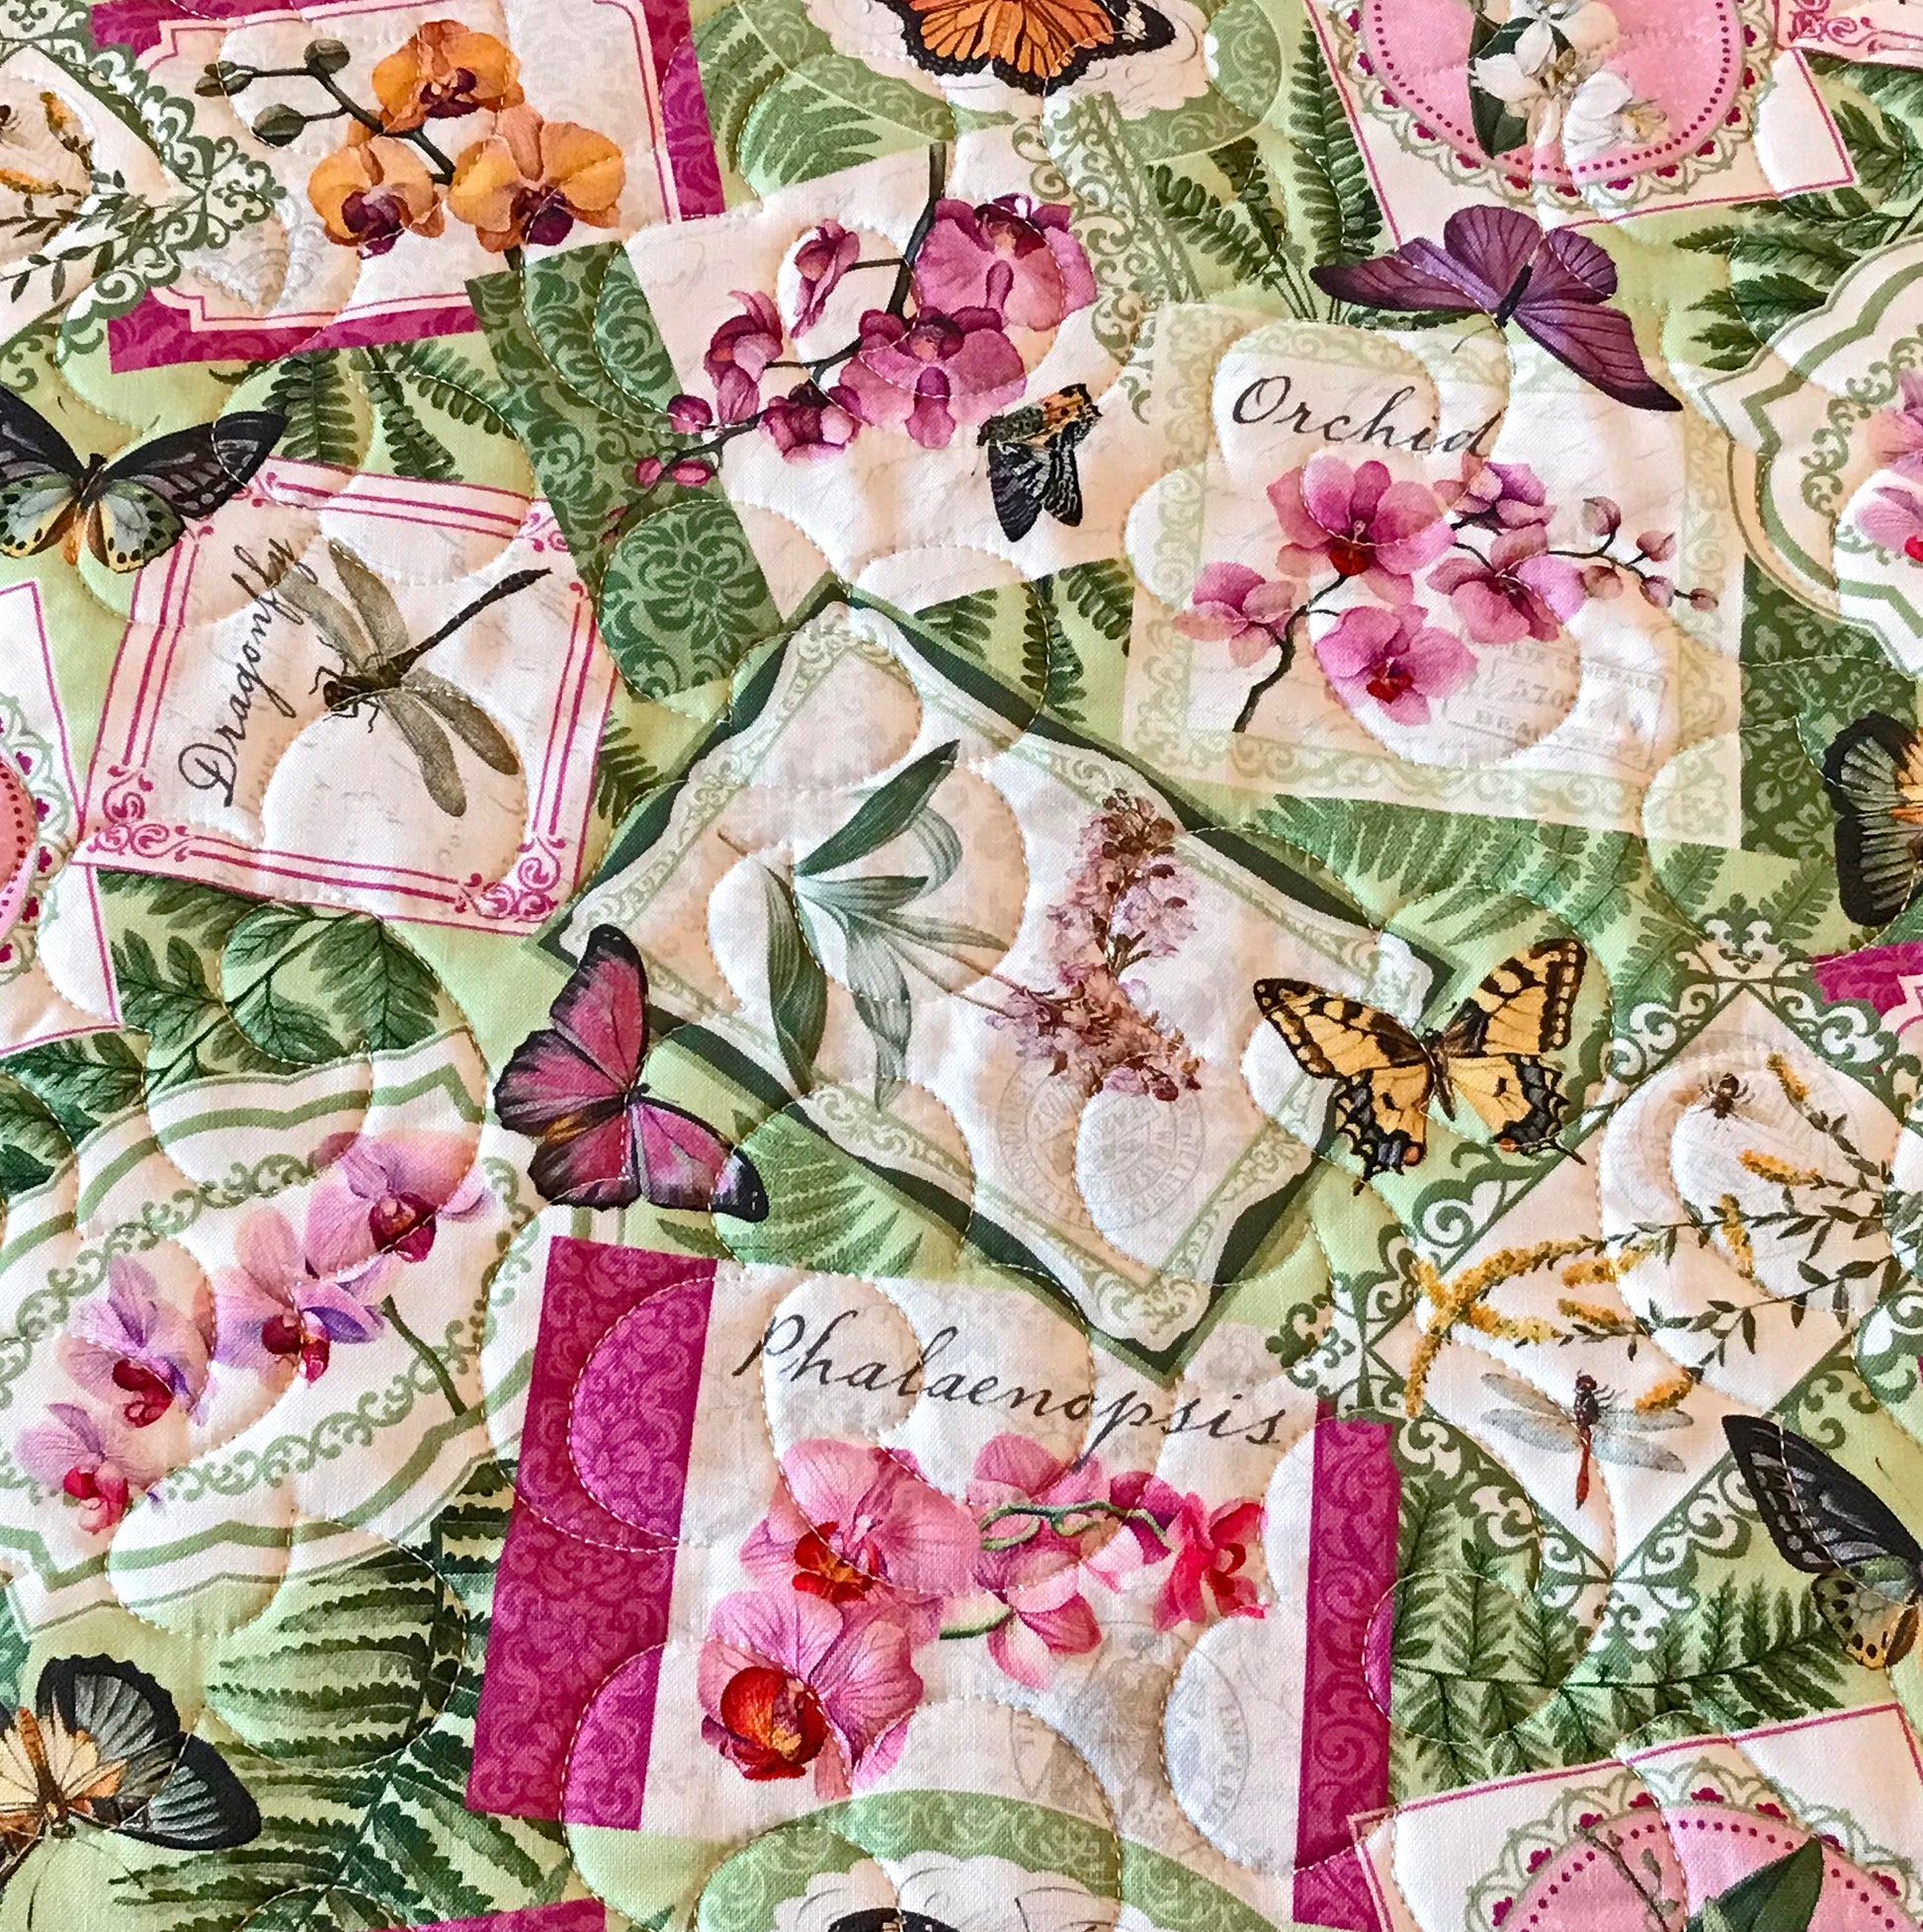 Butterfly Floral Table Topper - Handmade Quilts, Digital Patterns, and Home Décor items online - Cuddle Cat Quiltworks